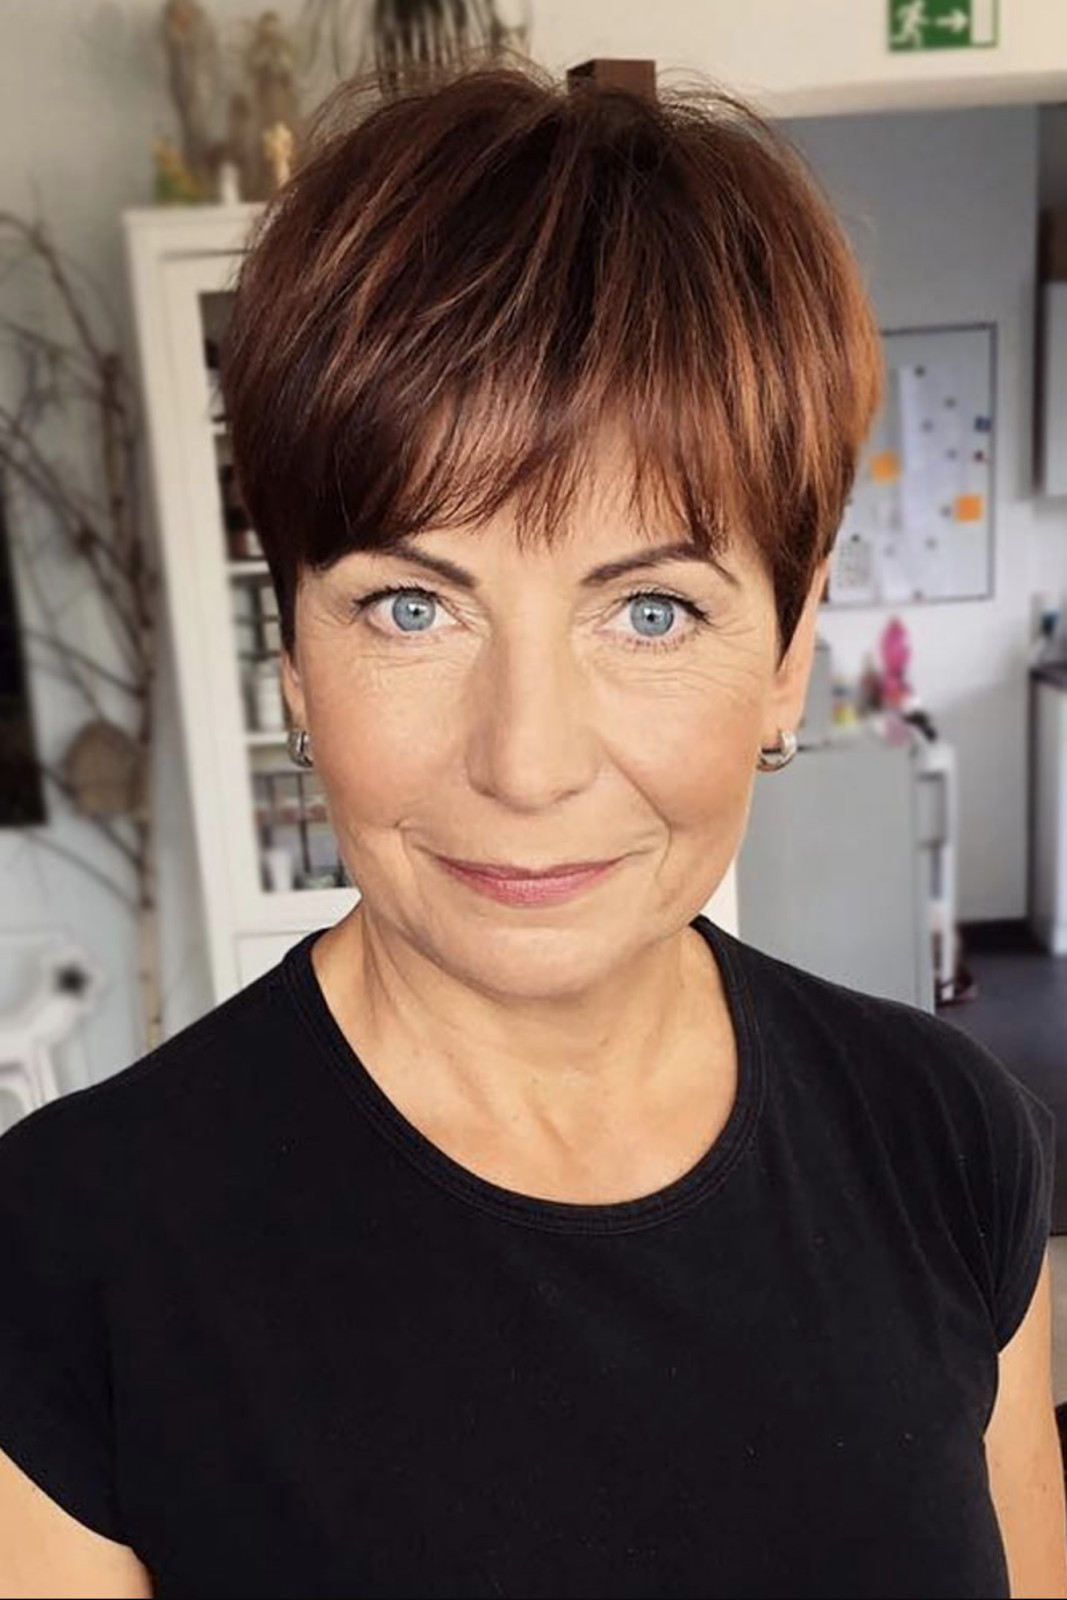 Hairstyles 2020 Short
 2019 2020 Short Hairstyles for Women Over 50 That Are